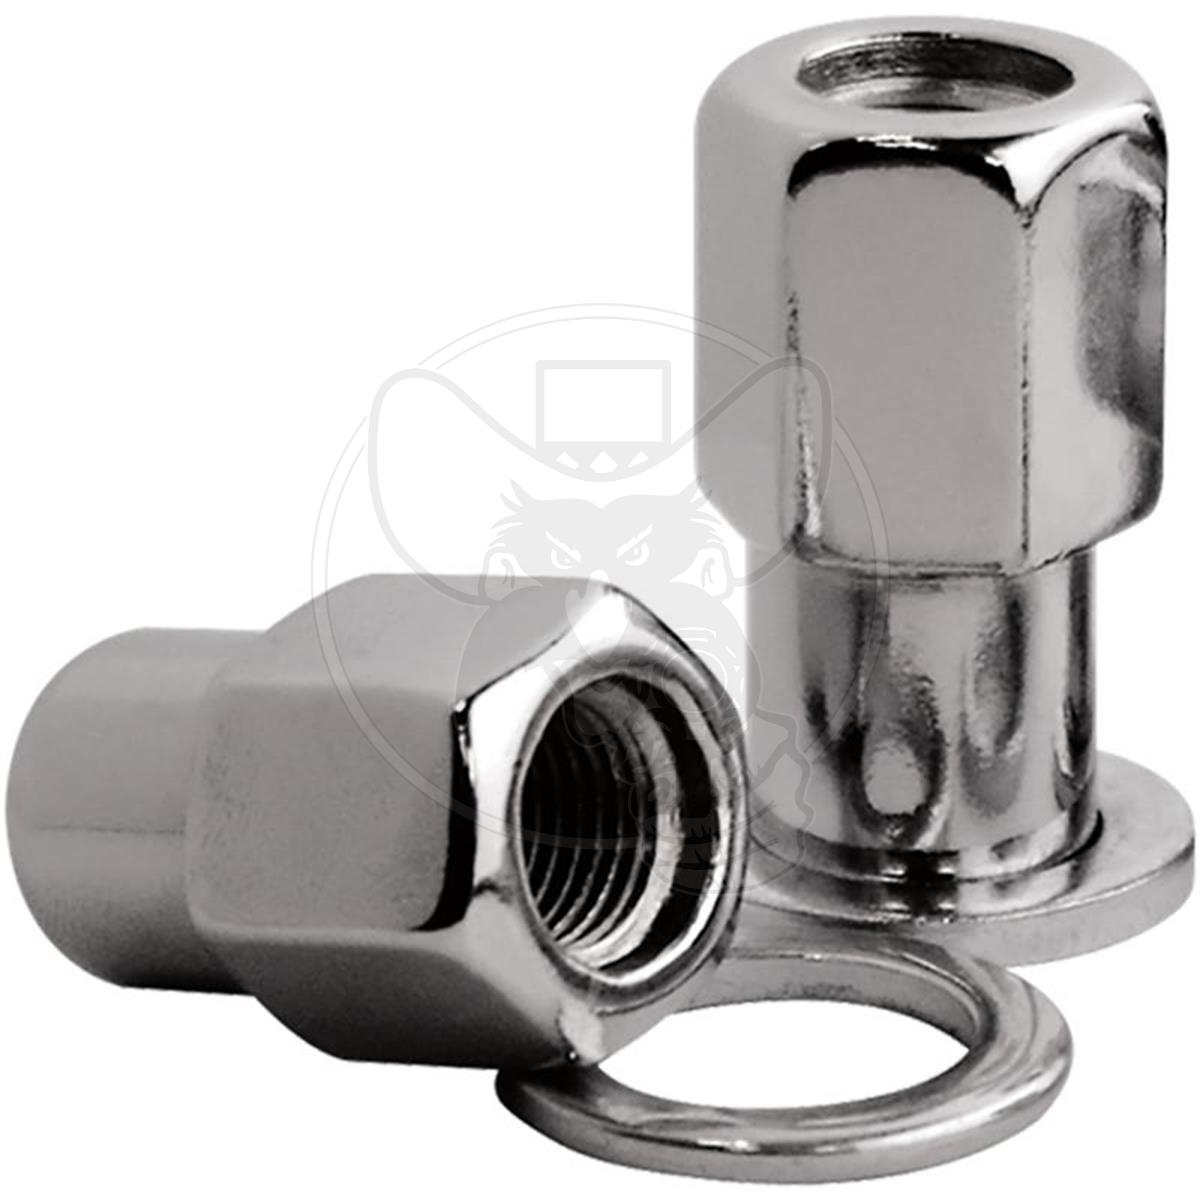 BILLET SPECIAL 7/16" OPEN END WHEEL NUTS ET STYLE CONICAL SEAT 10PK